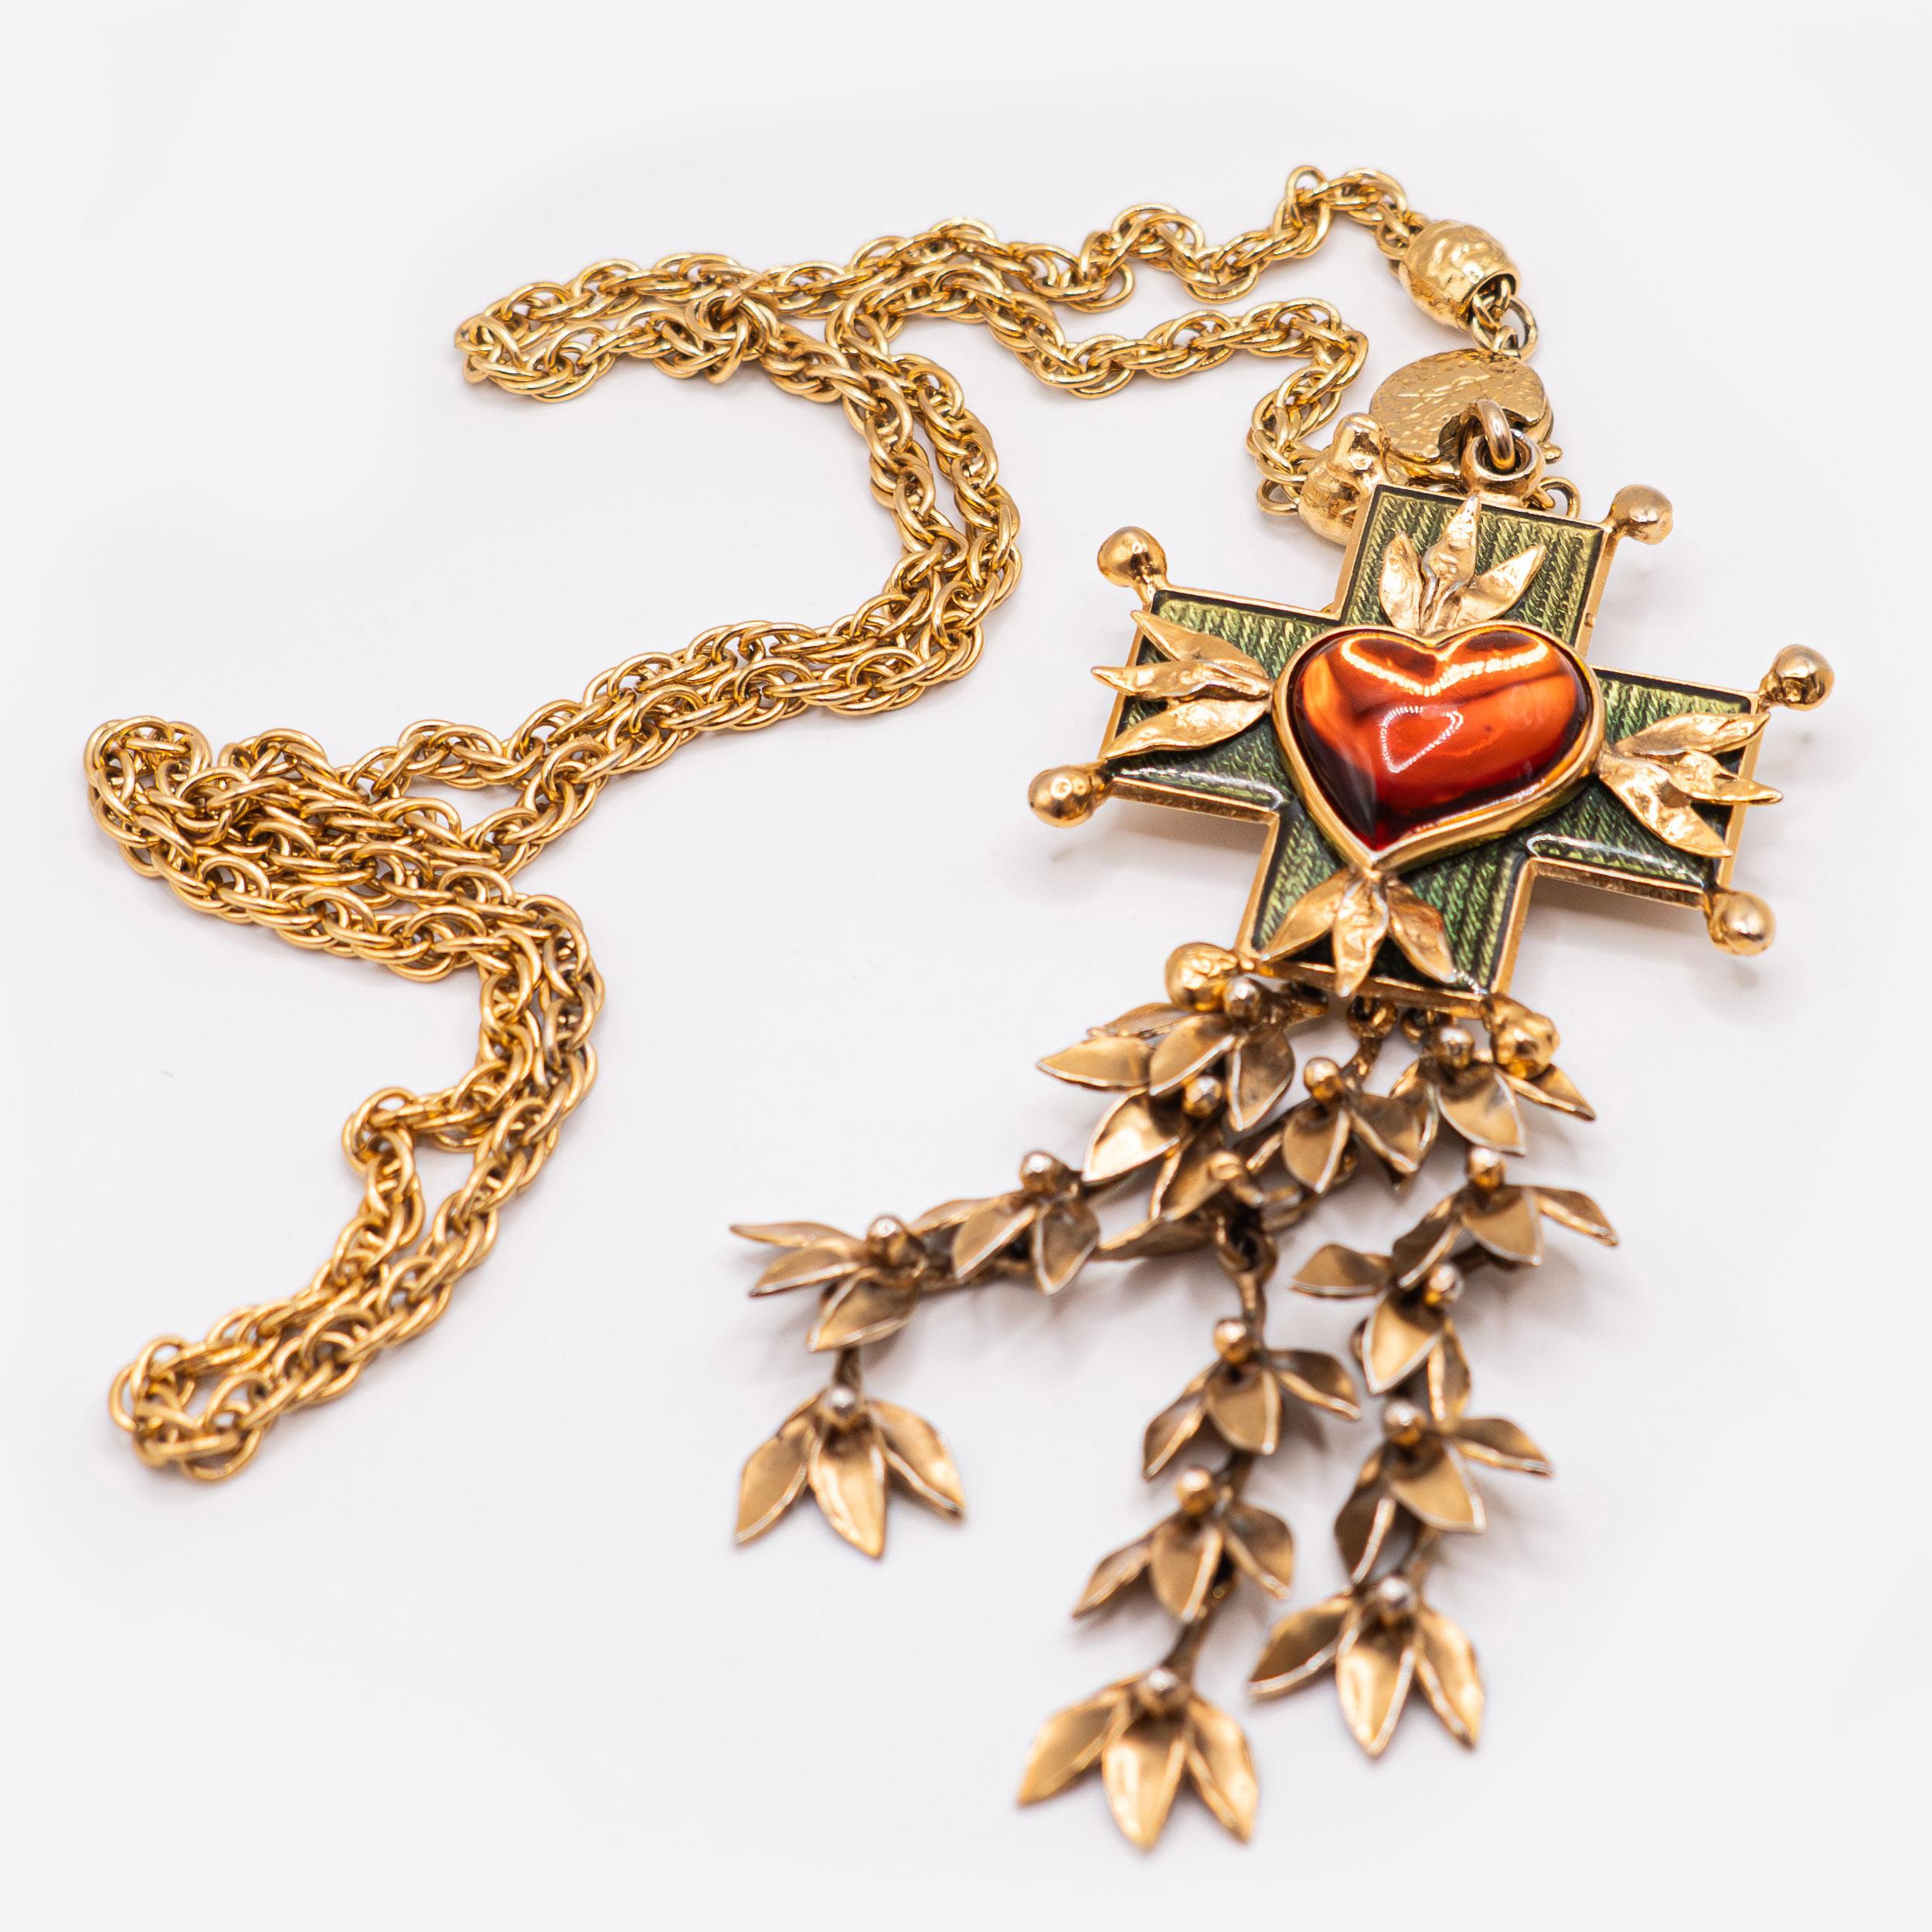 Stunning  and highly collectible twisted mesh necklace and cross brooch pendant with heart motif and foliage branches in gold metal with green Fabergé enamel and orange resin cabochon - signed. Design by Loulou de la Falaise - Made by